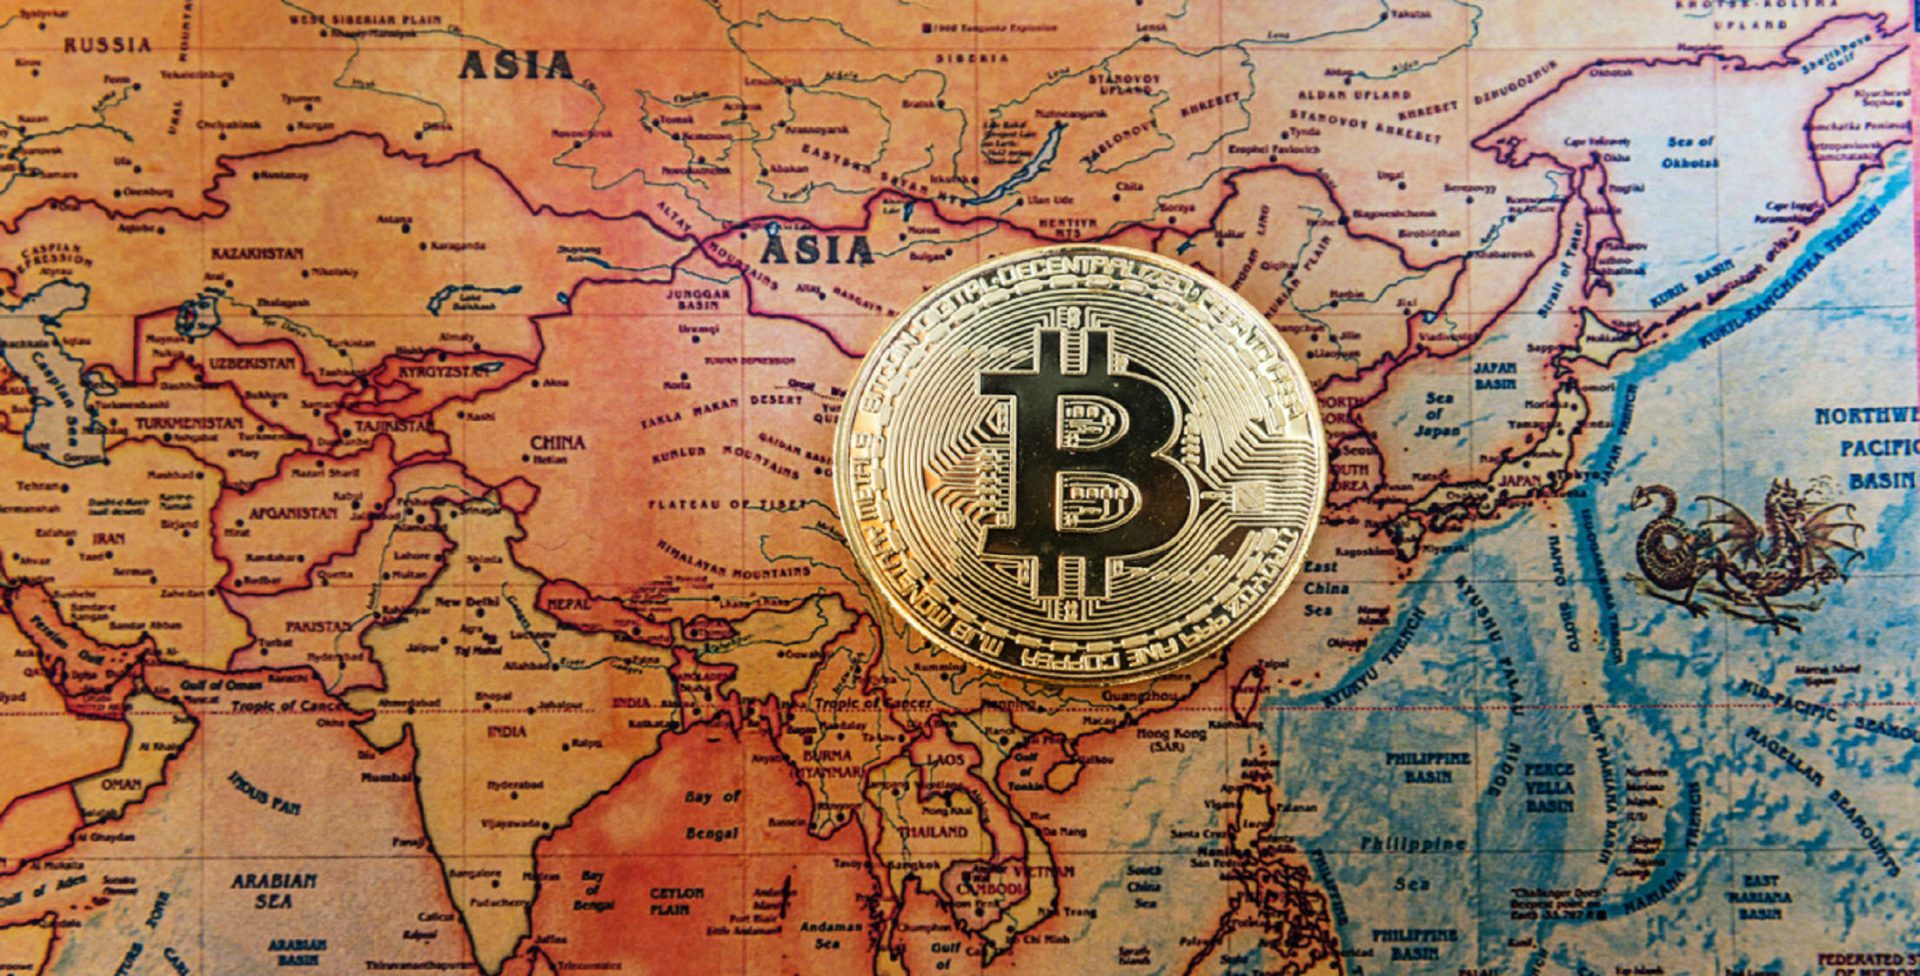 emerging wealth in asia bitcoin